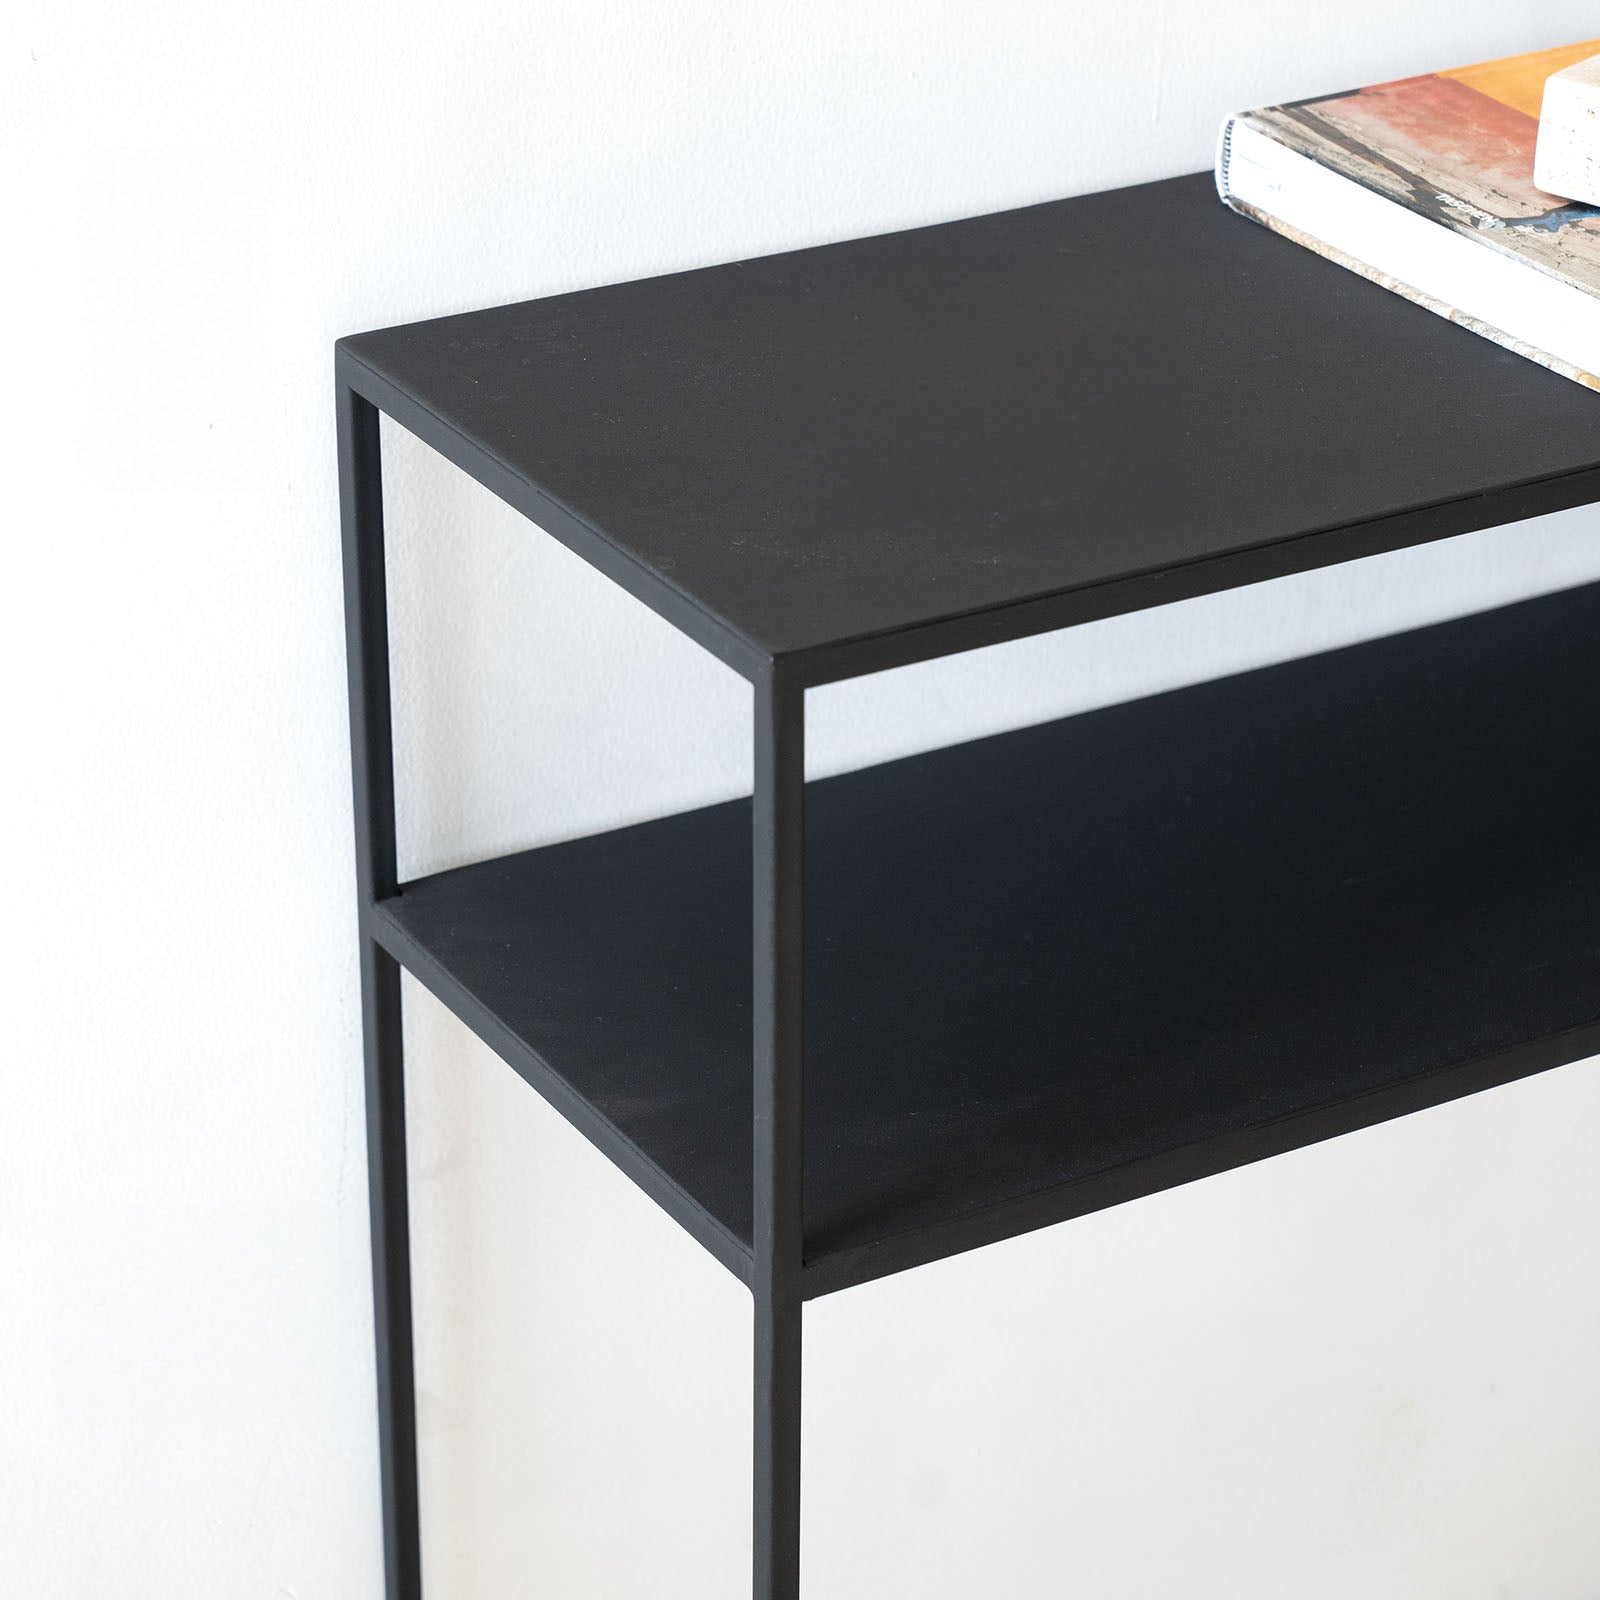 Monochrome Console B Small - Wood and Steel Furnitures